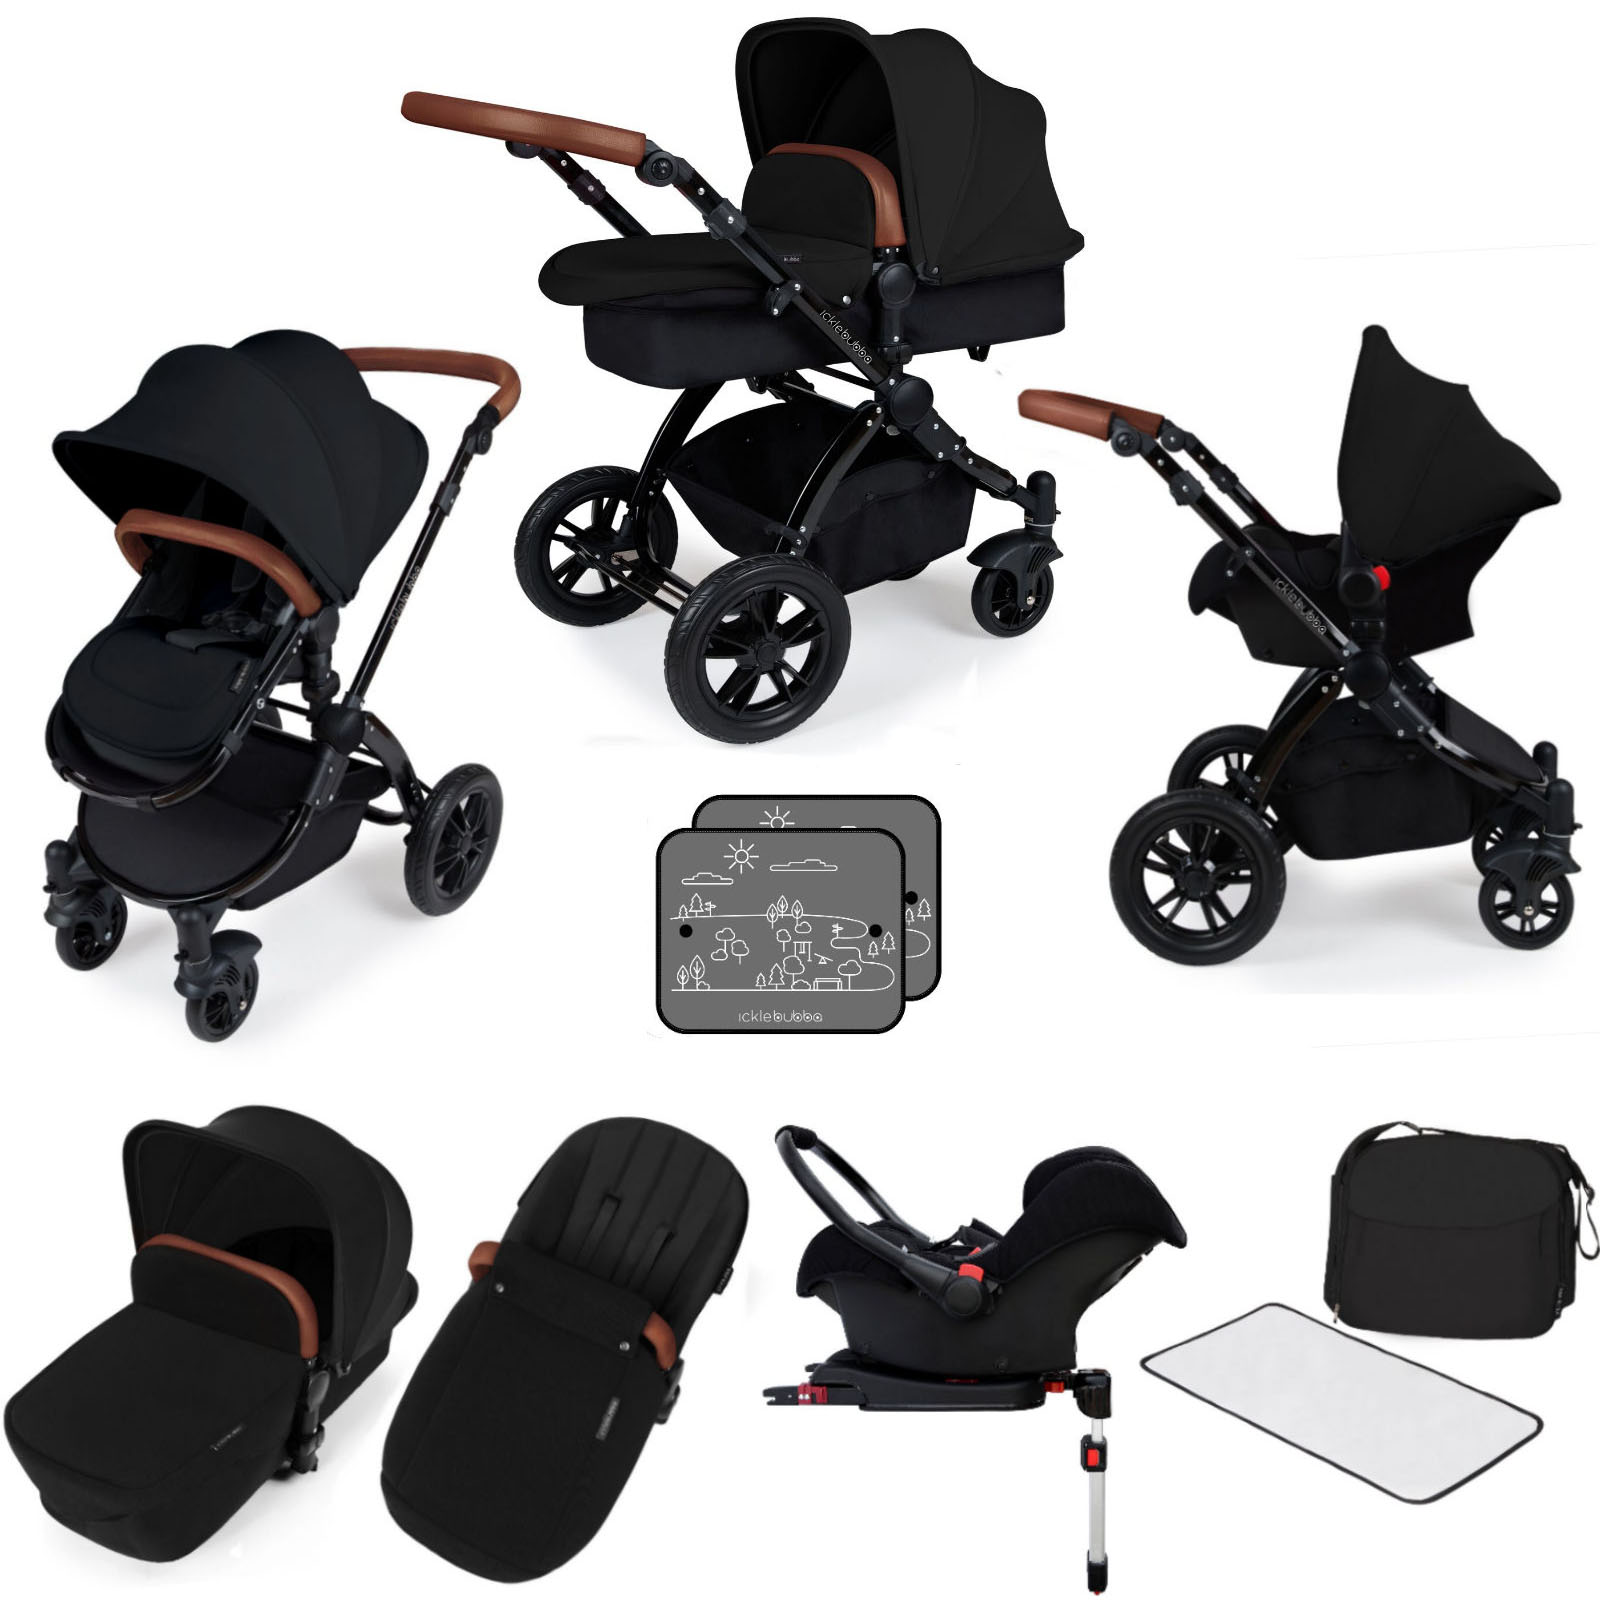 Ickle bubba Stomp V3 Black All In One Travel System & Isofix Base - Black...